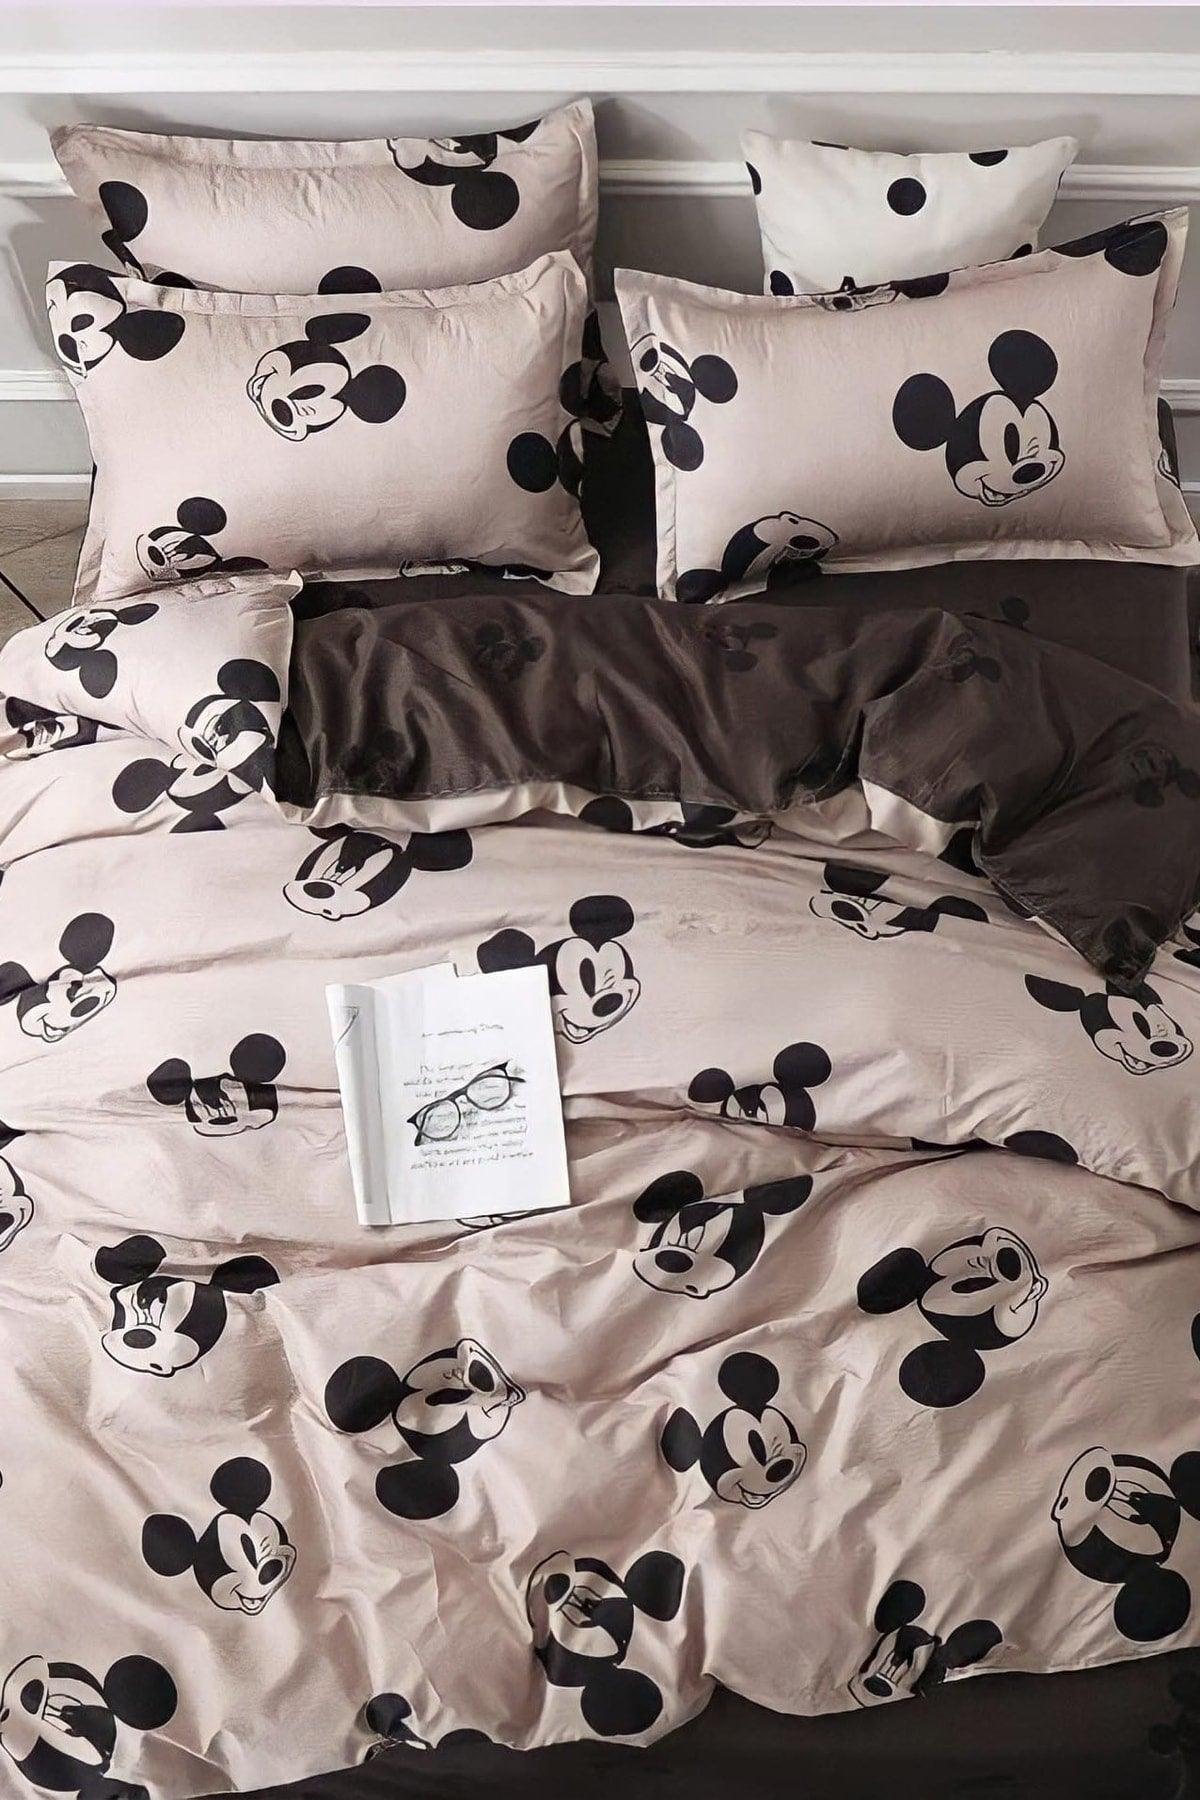 Mickey Mouse Single Double Sided Duvet Cover Set - Swordslife